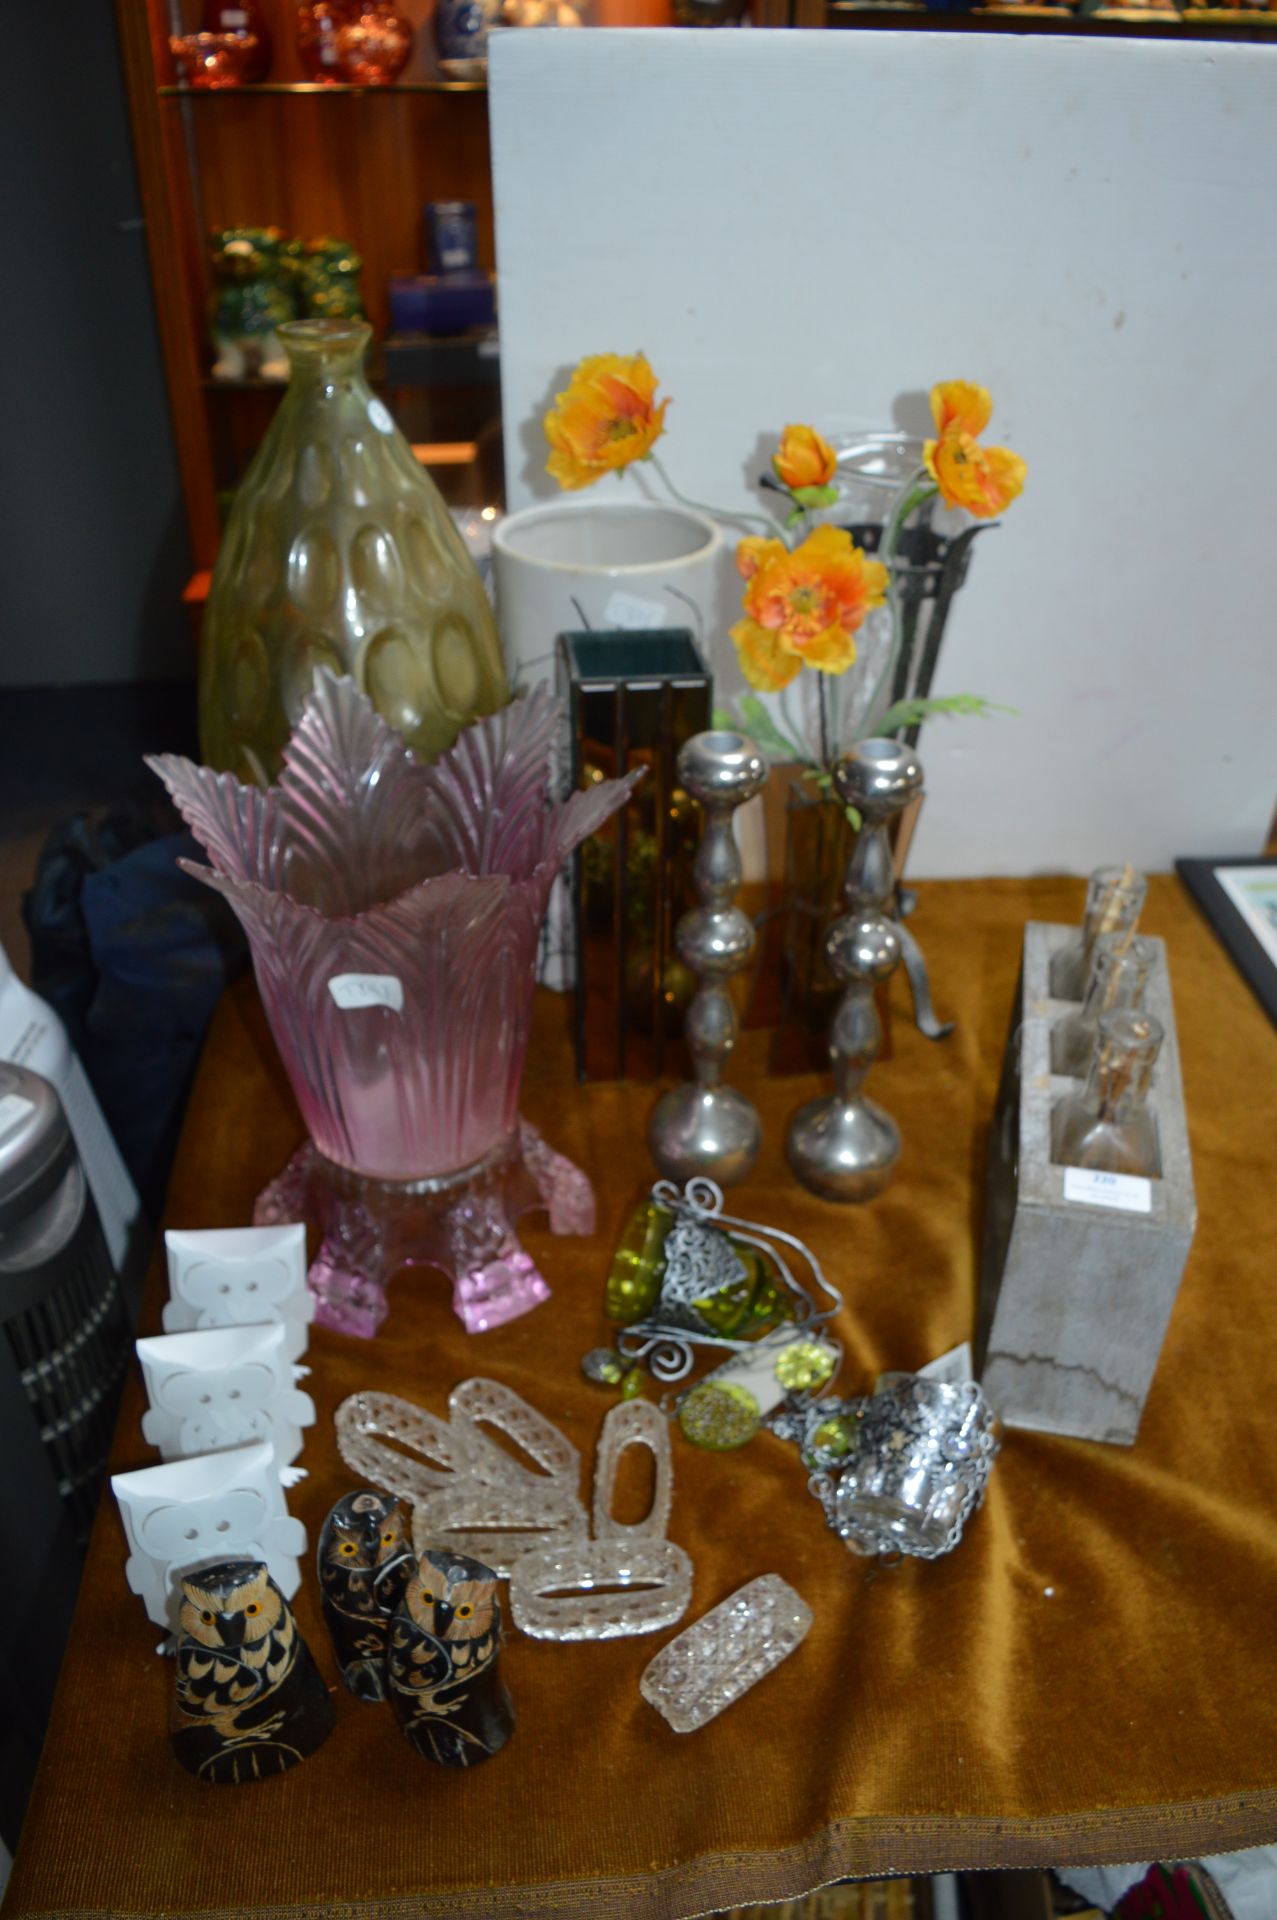 Decorative Vases, Candlesticks and Owl Ornaments